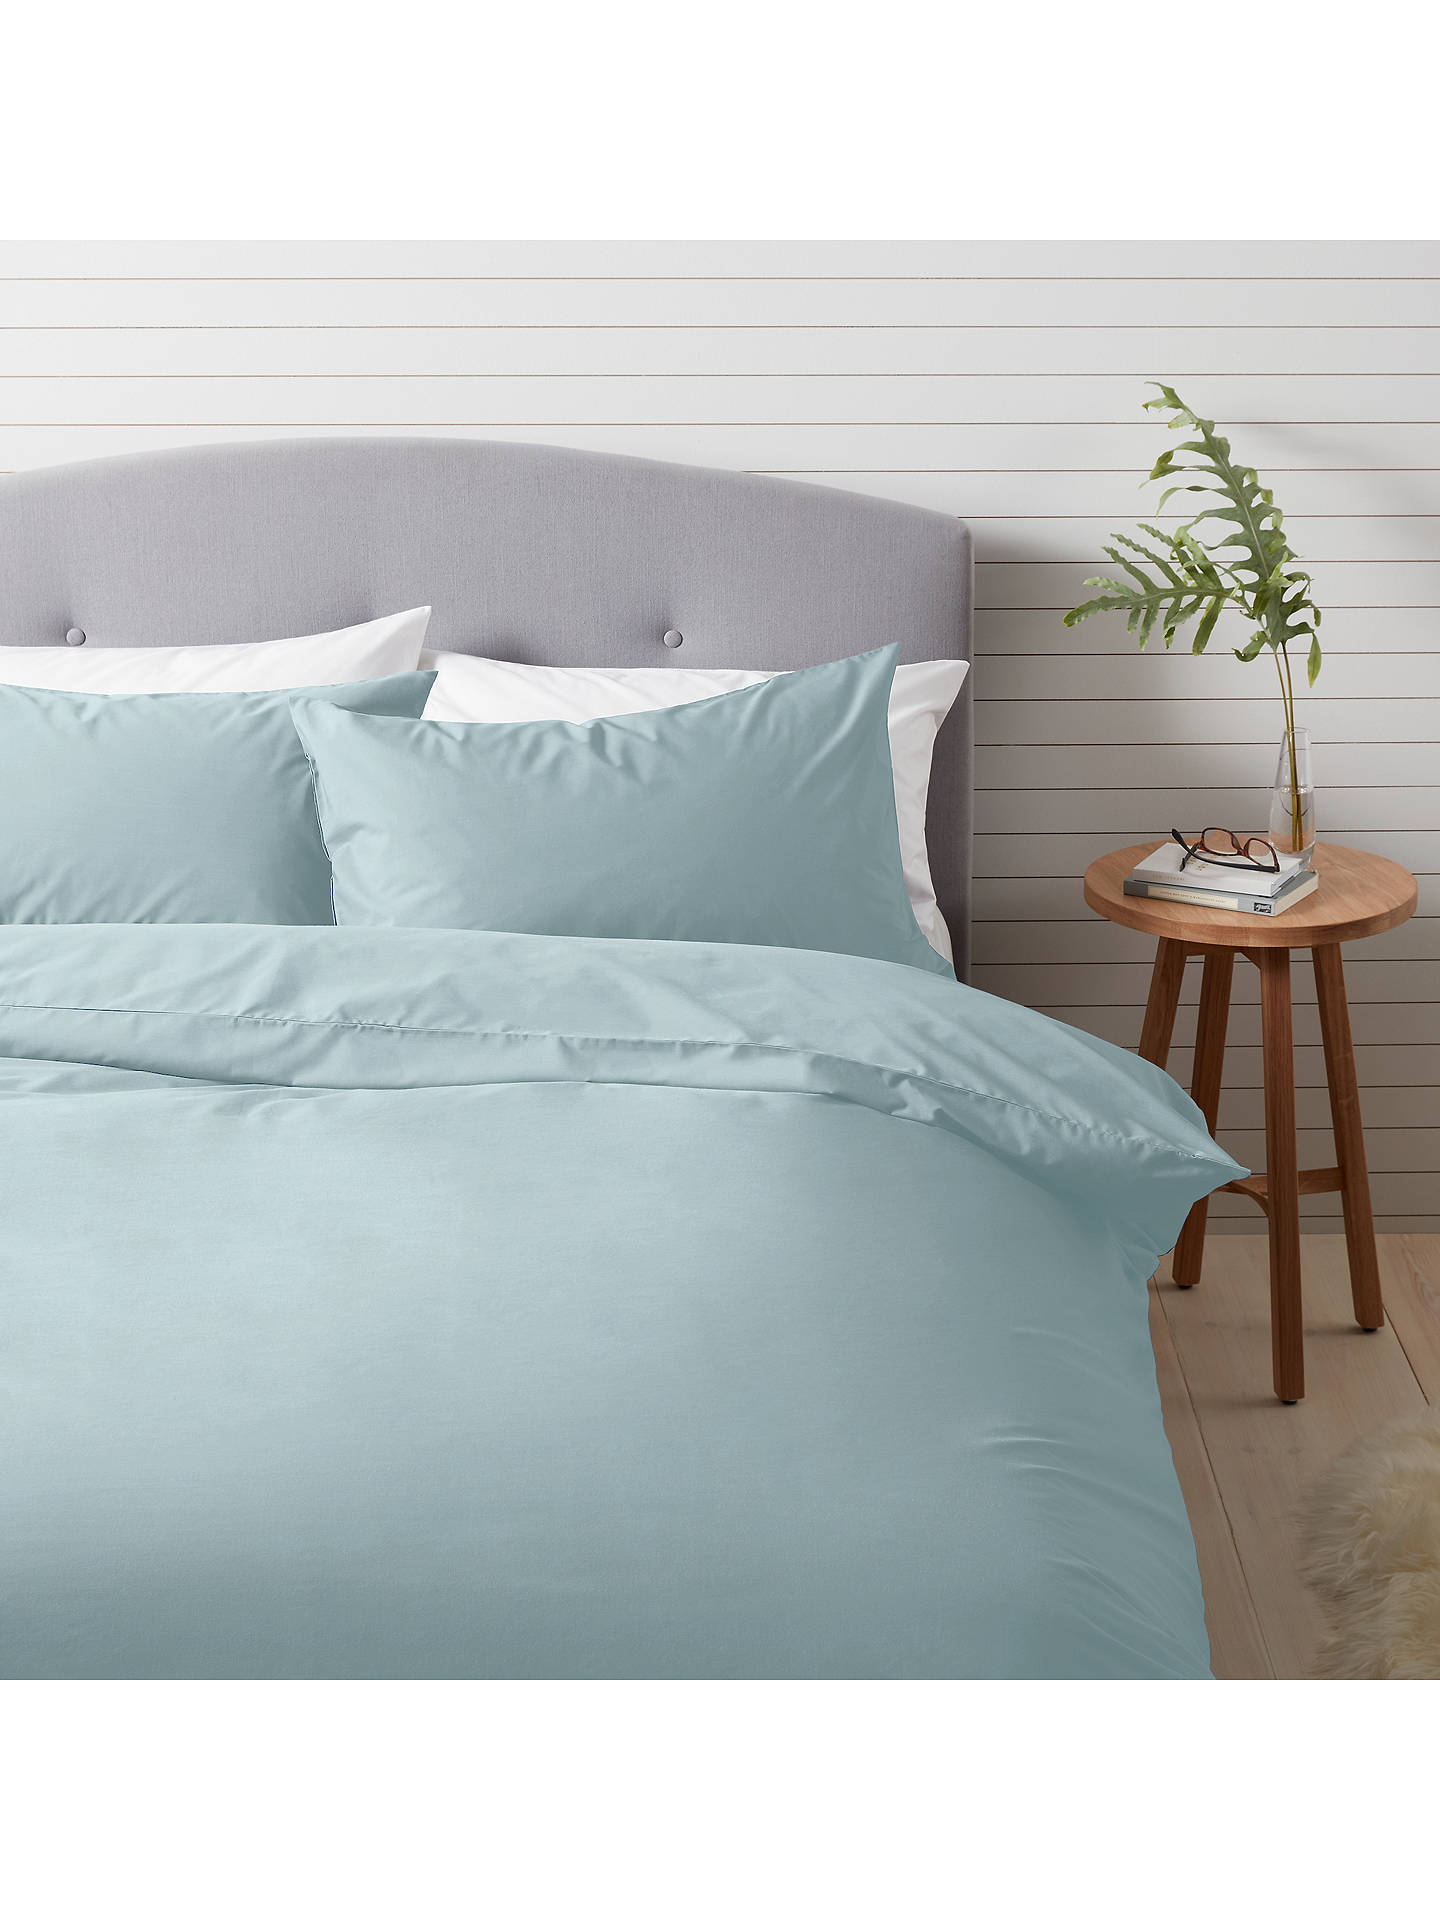 John Lewis & Partners Easy Care 200 Thread Count Polycotton Bedding at John Lewis & Partners